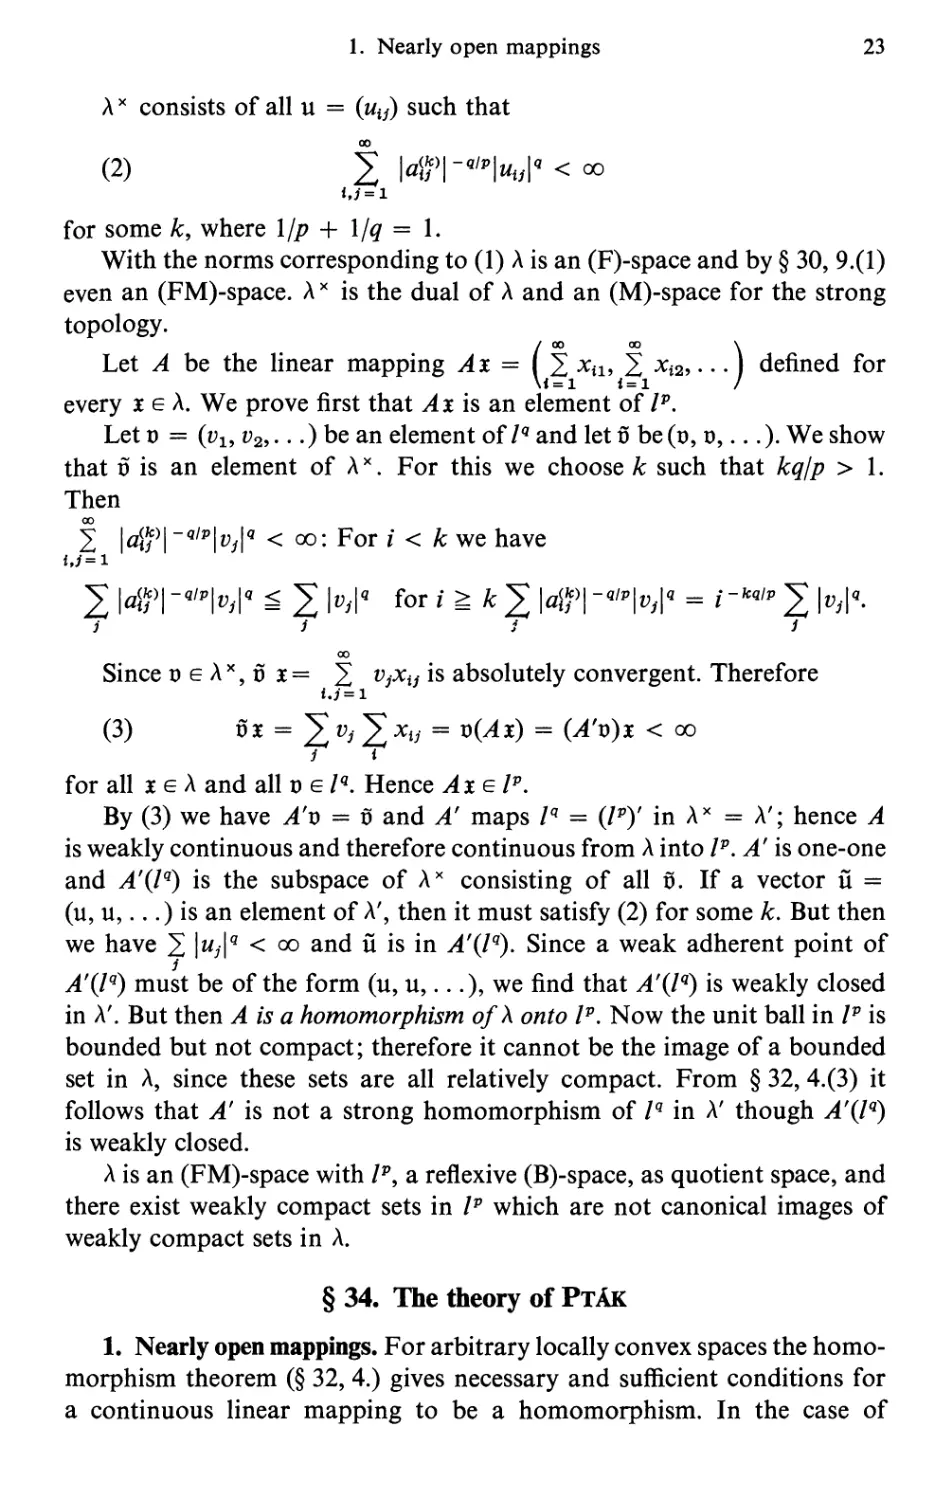 §34. The theory of Pták